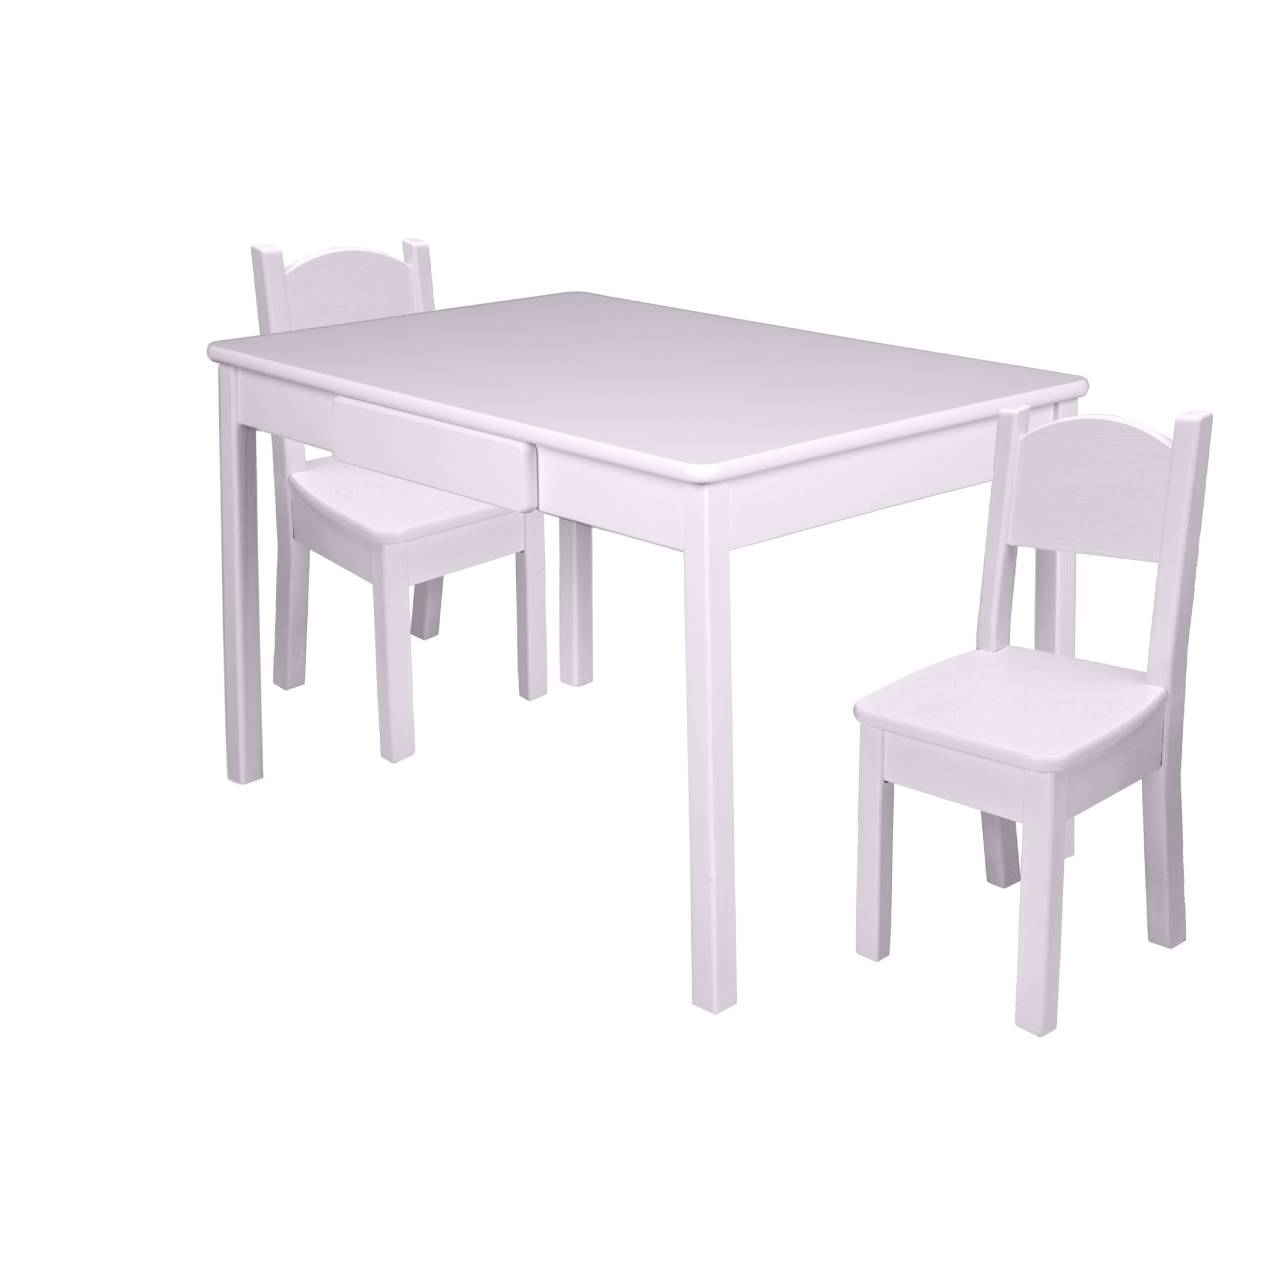 Little Colorado's ARTS & CRAFTS TABLE WITH OPEN BACK CHAIRS - Fancy Nursery